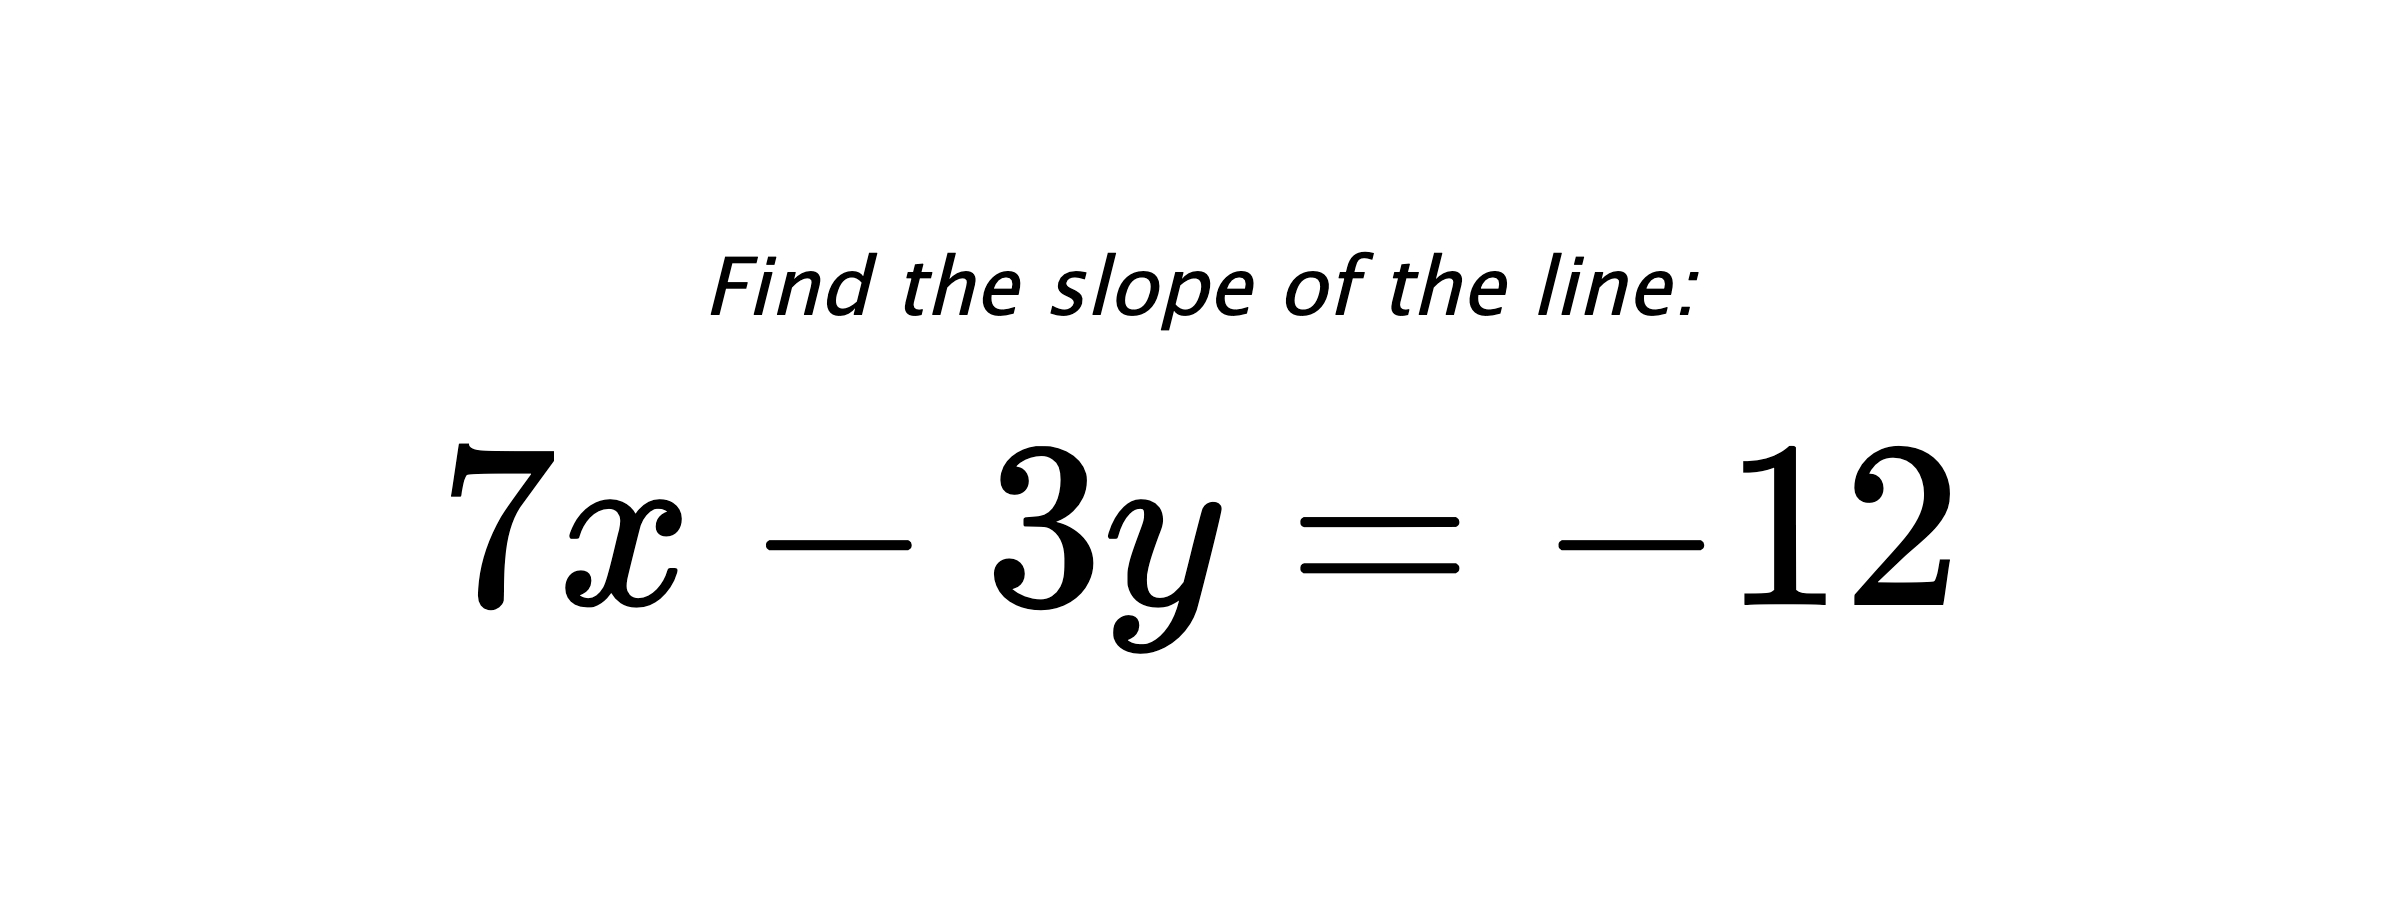 Find the slope of the line: $ 7x-3y=-12 $